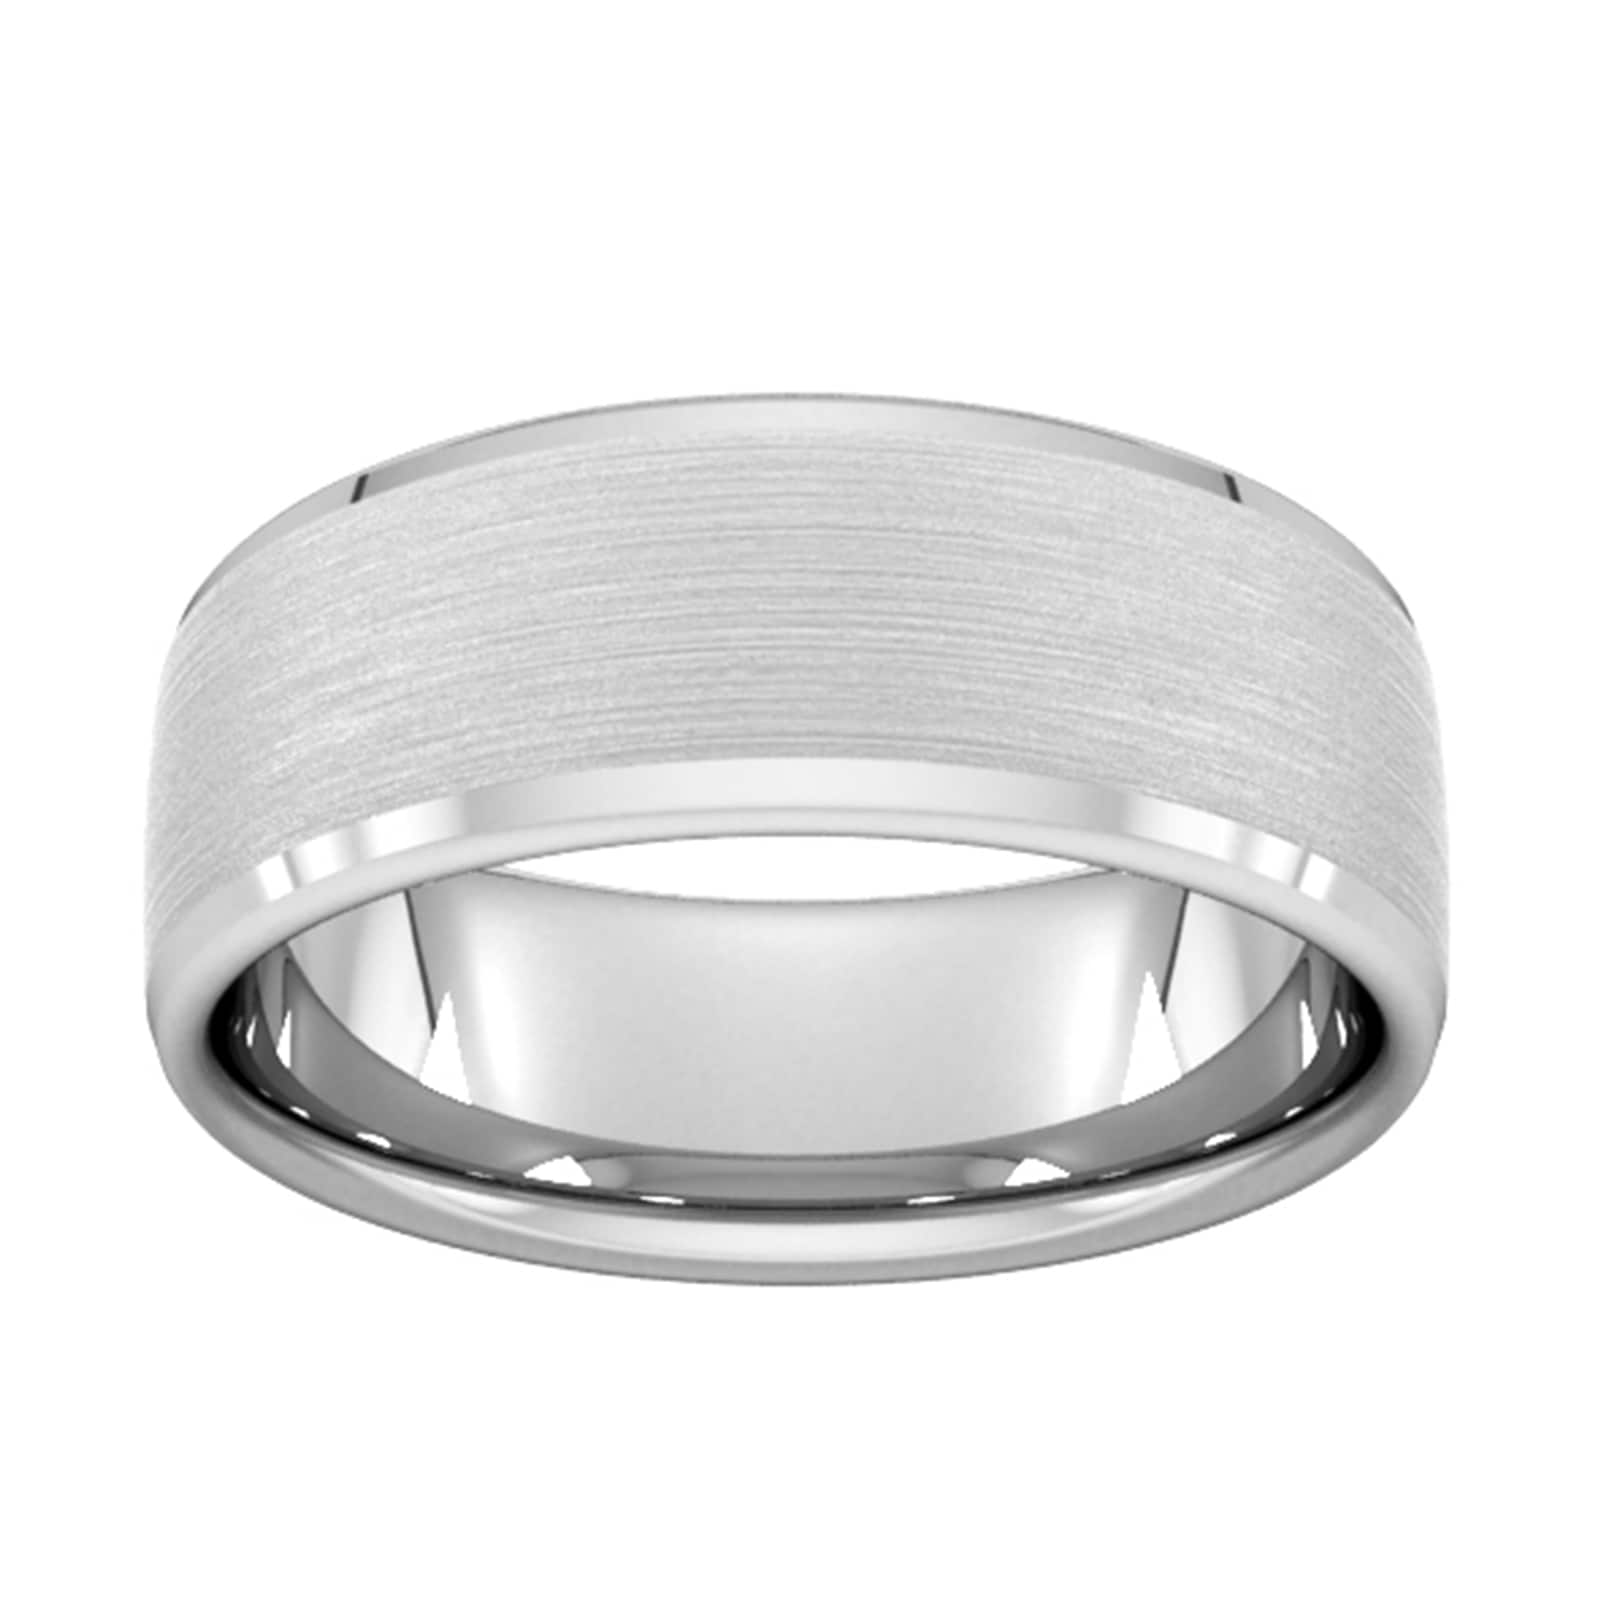 8mm slight court extra heavy polished chamfered edges with matt centre wedding ring in 950 palladium - ring size p